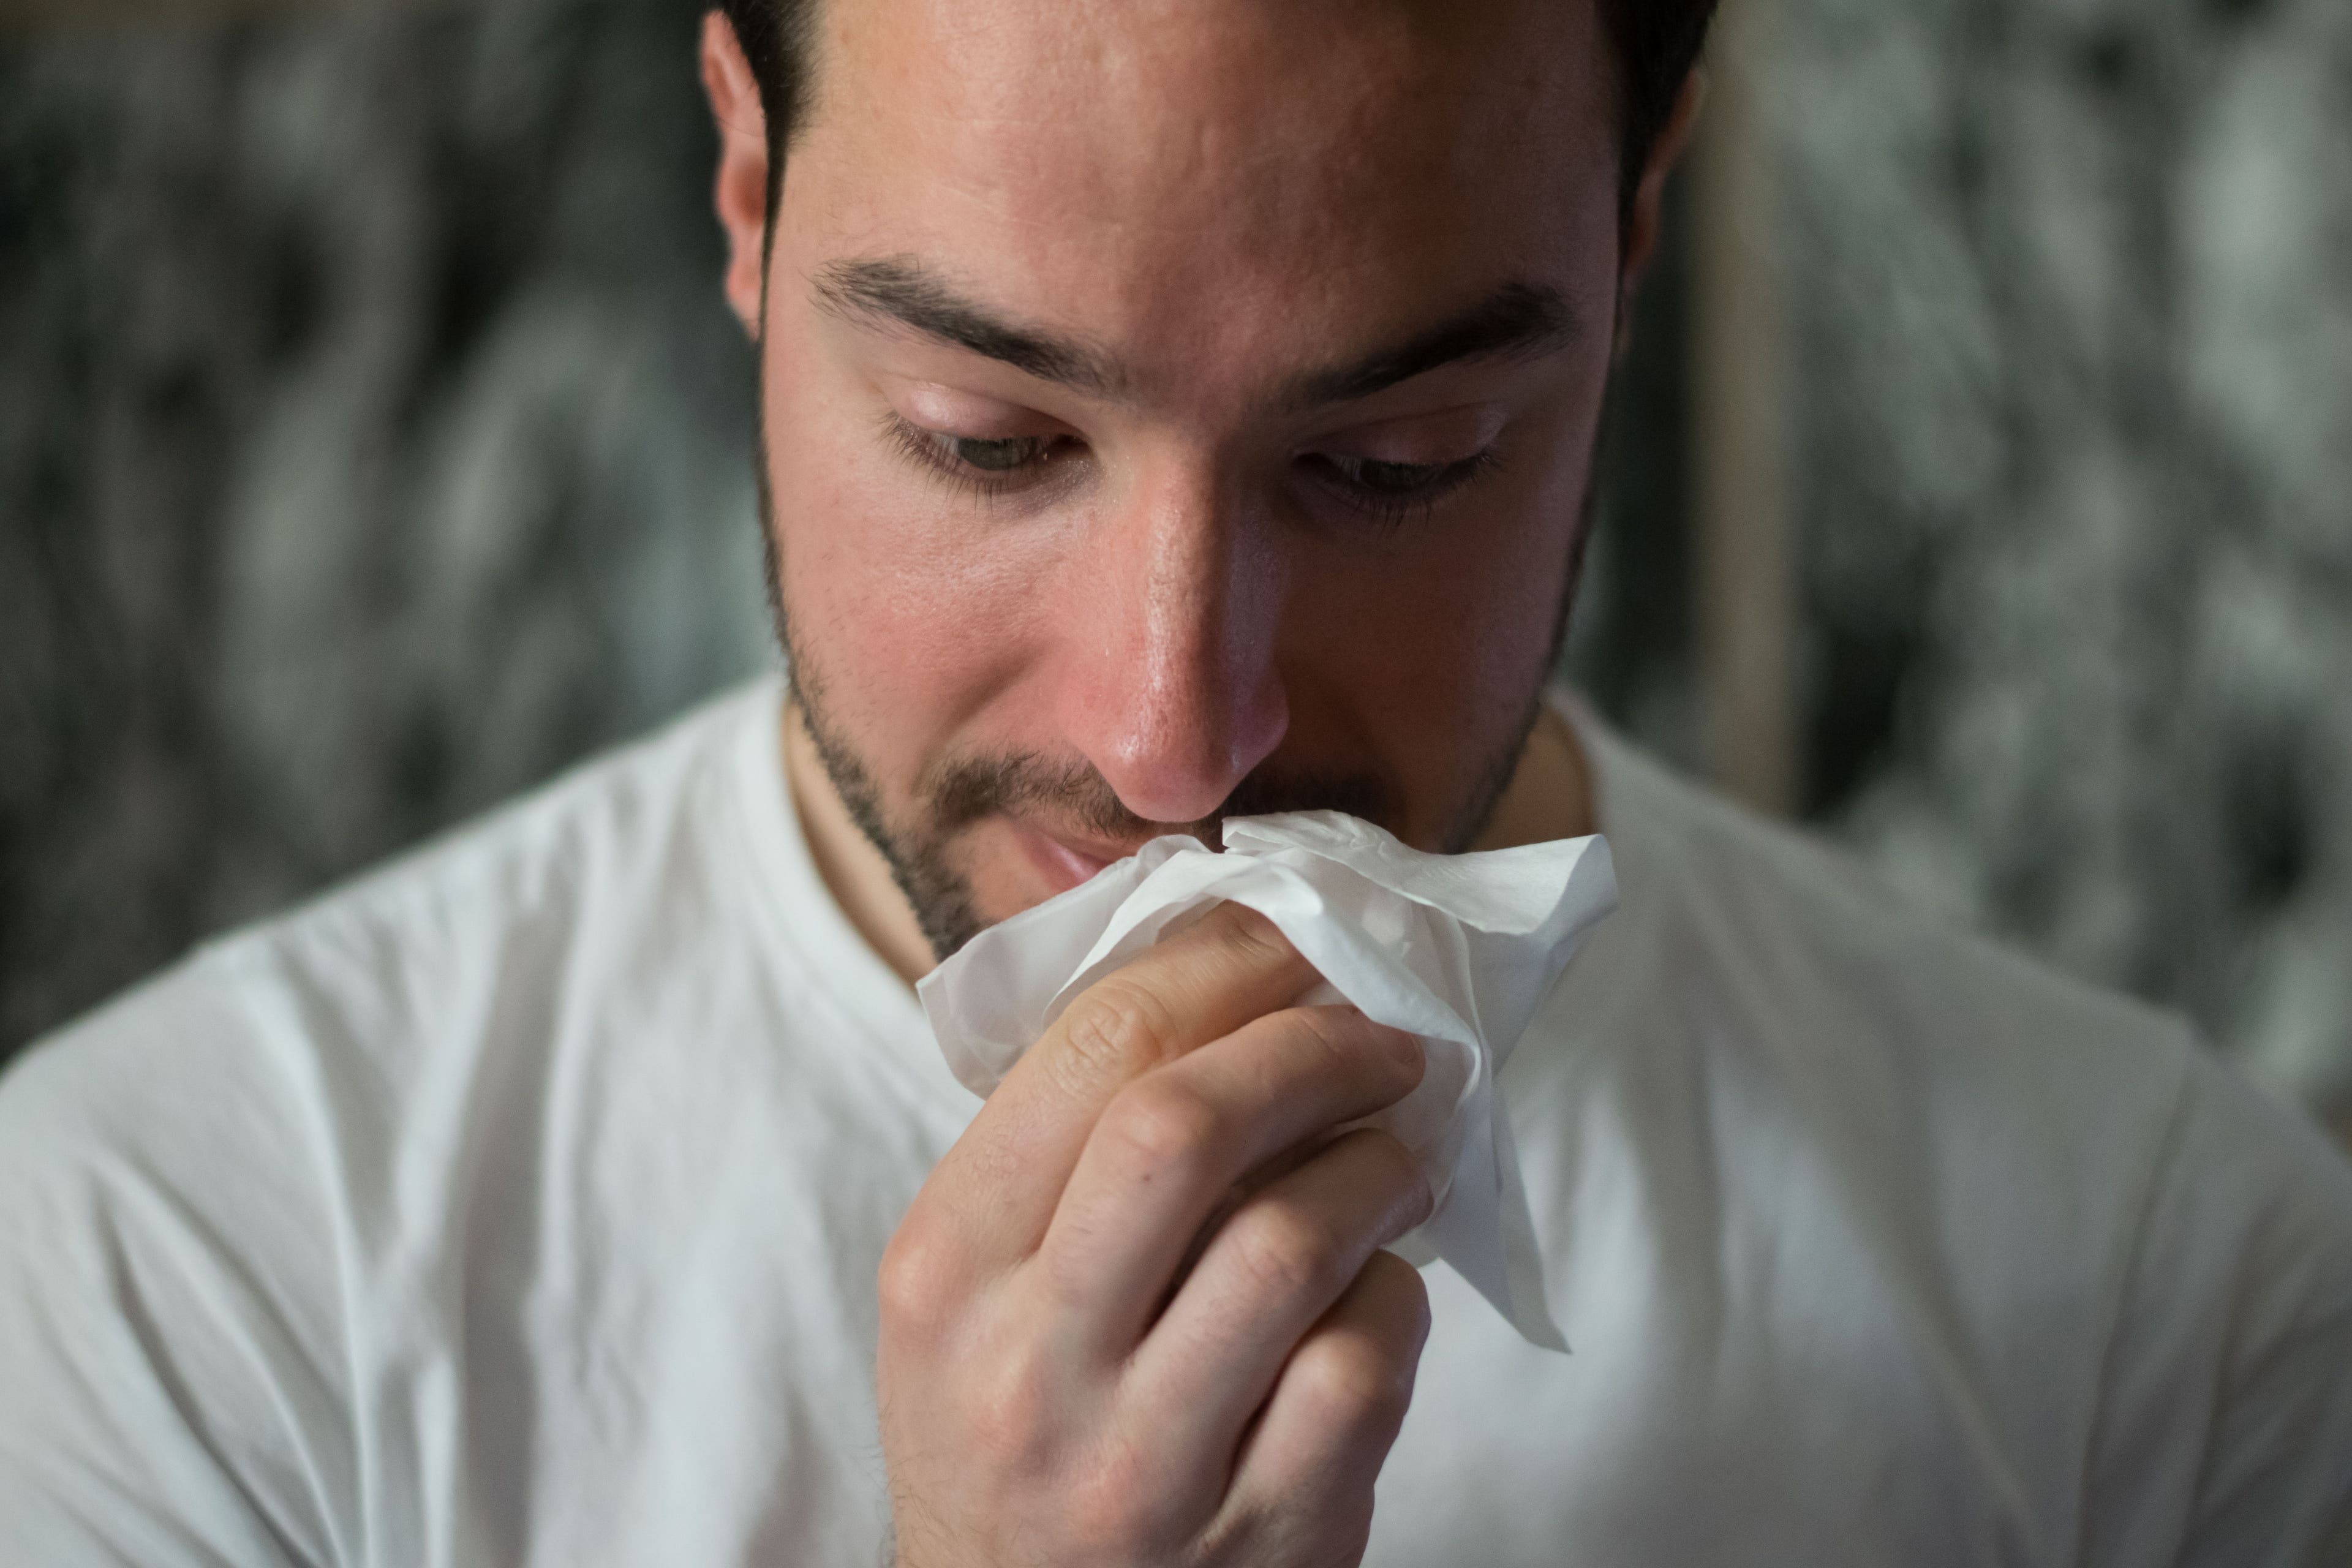 Does Marijuana Help Sinus Infections? New Study Says Yes, Though More Research Needed